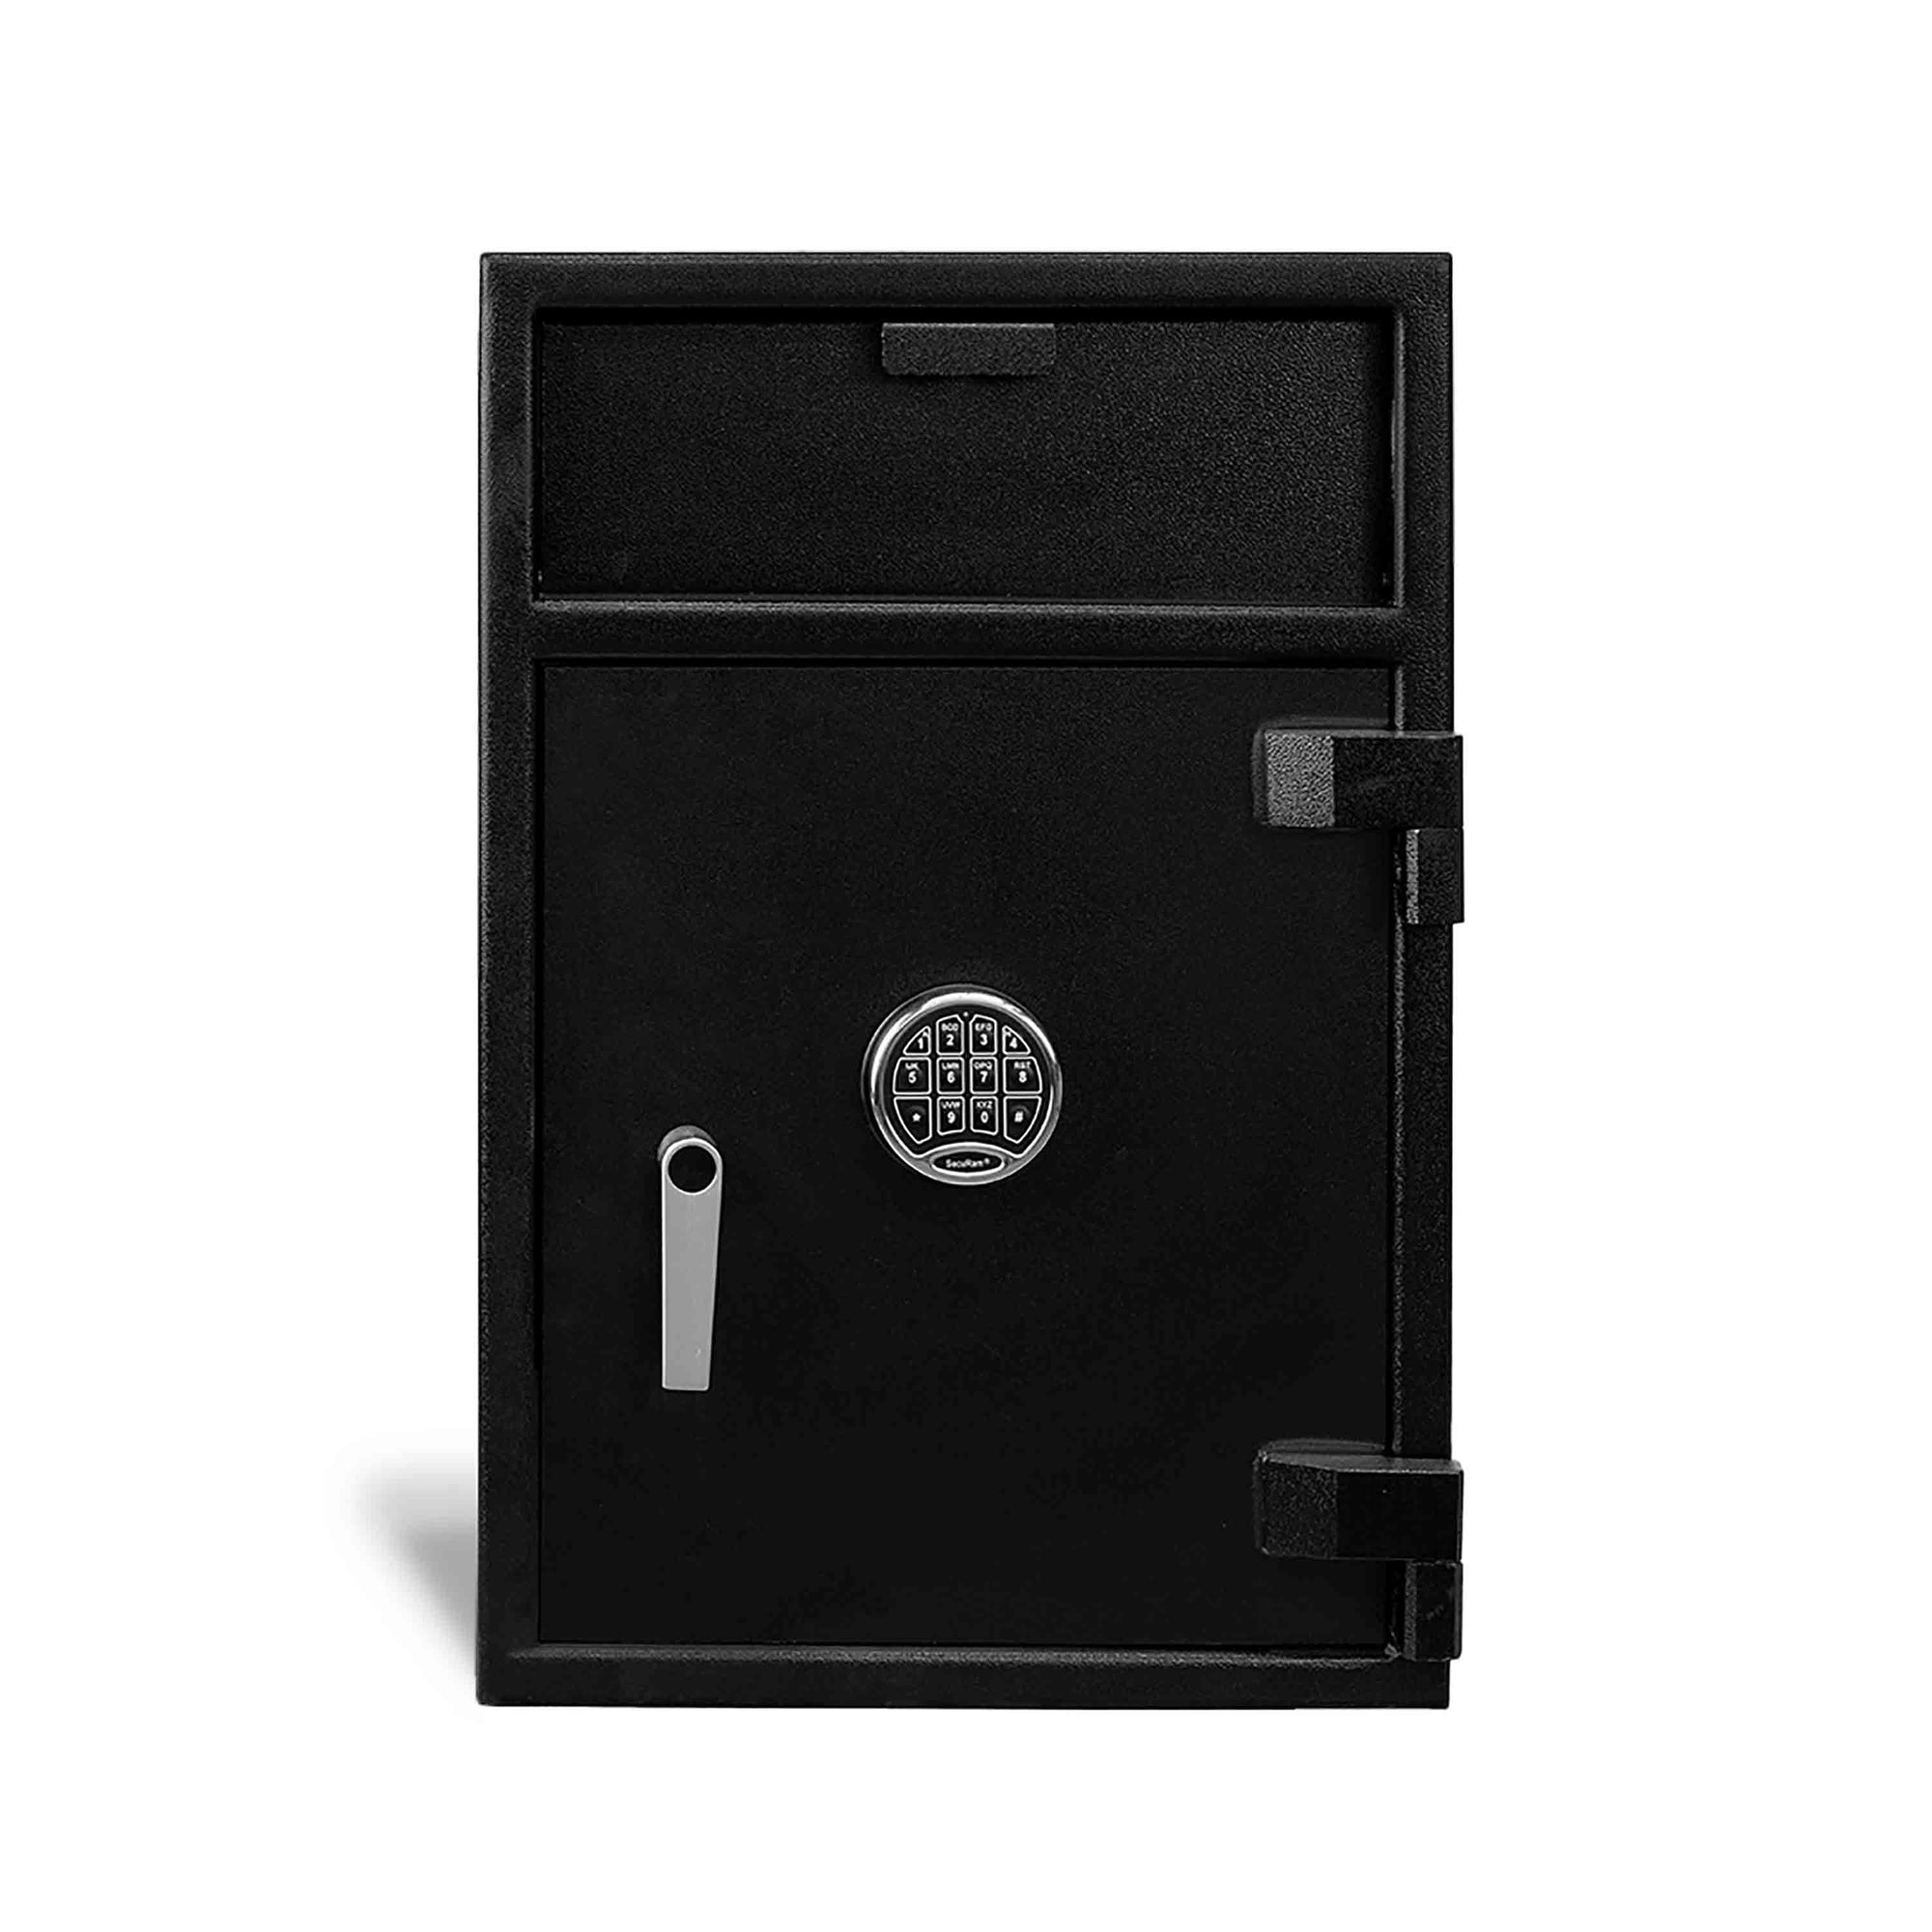 Pacific Safe FL3020MK1 Front Load Depository Safe with Internal Compartment